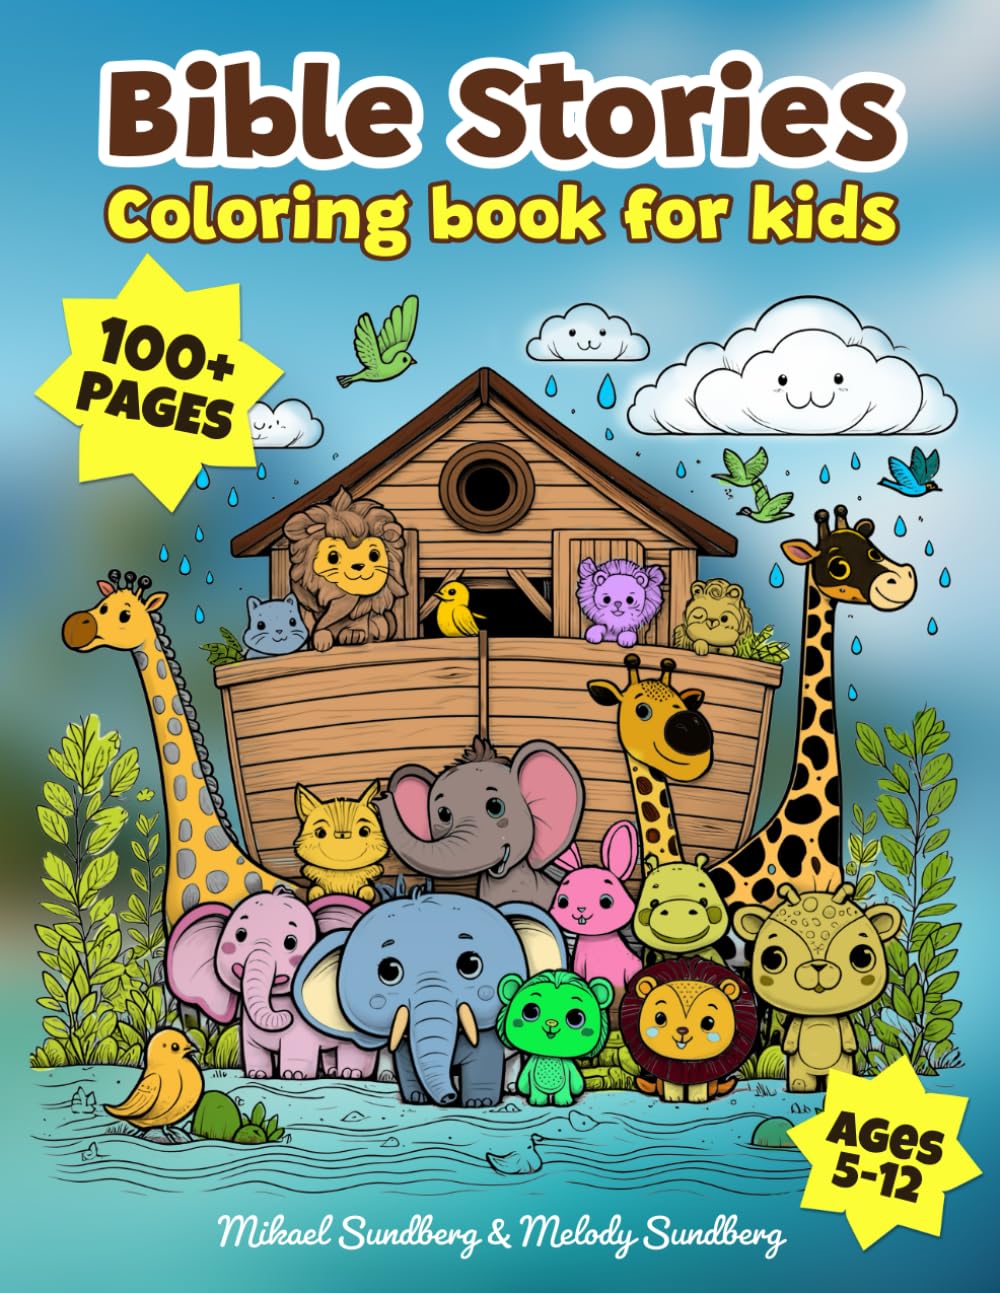 Bible Stories Coloring Book: for kids ages 5-12 by Sundberg